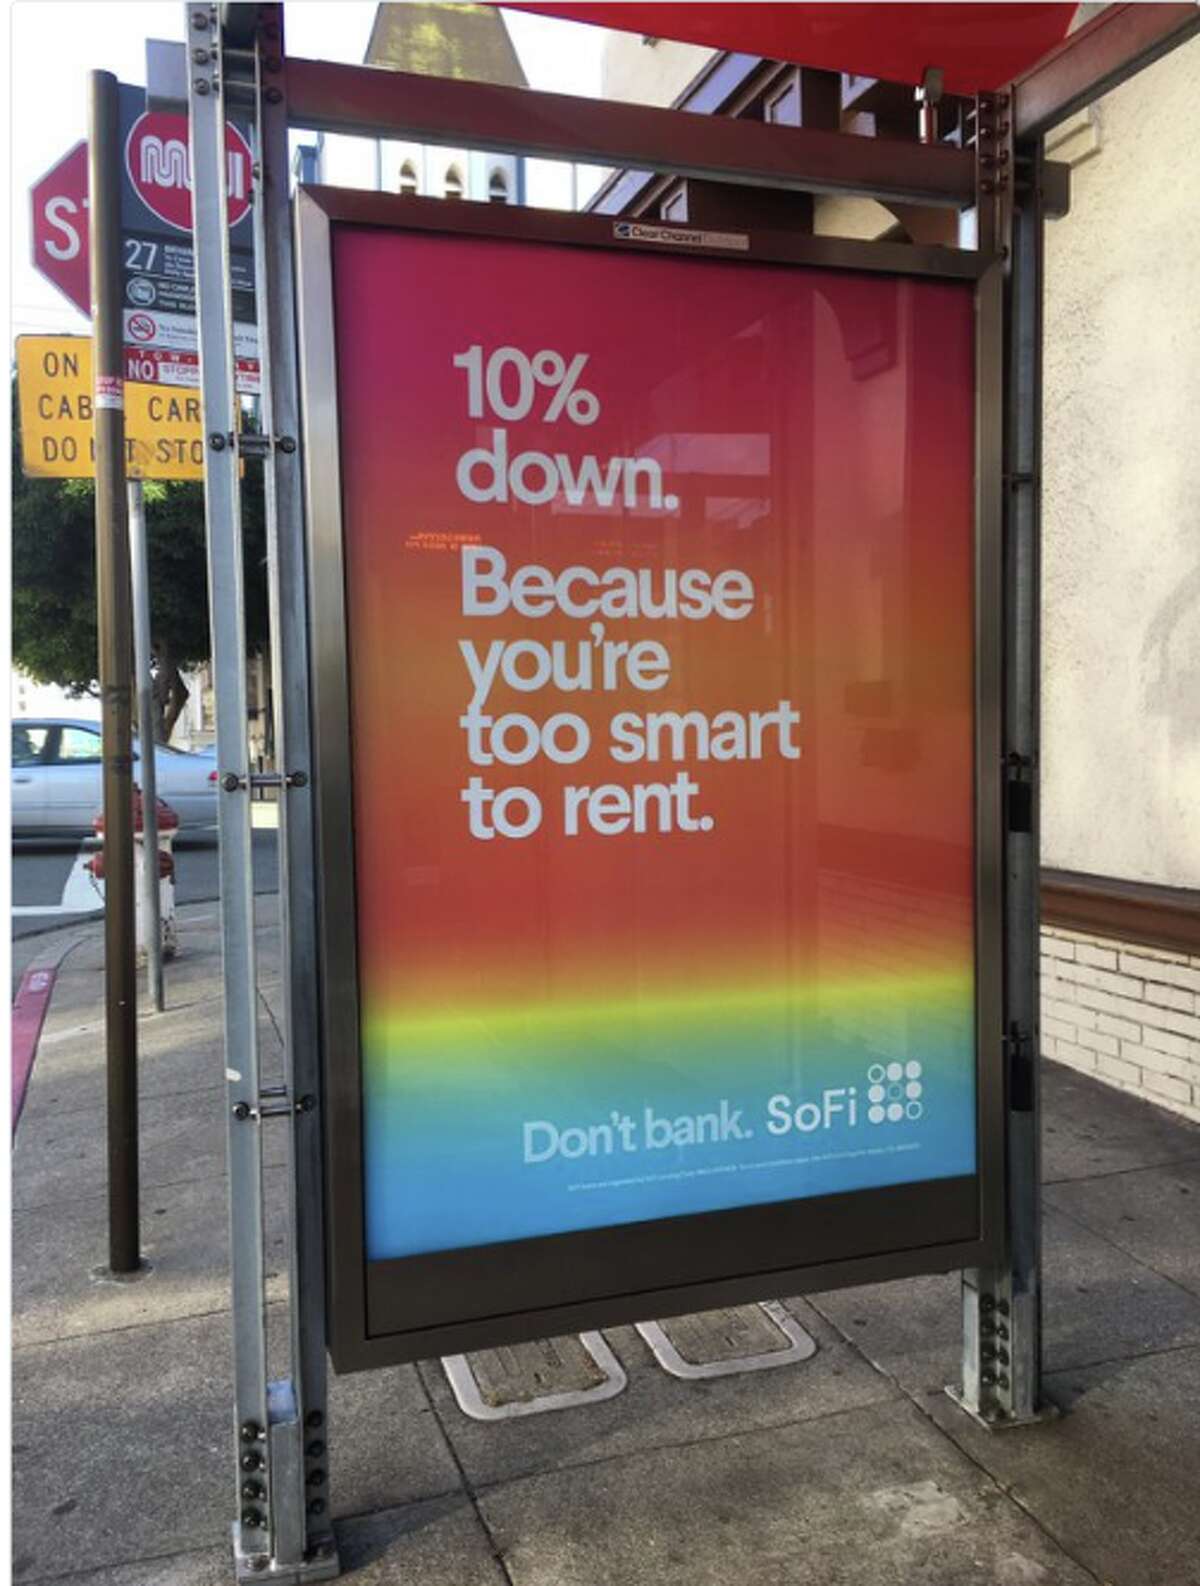 An ad for SoFi appearing on the sides of bus stops around San Francisco basically calls anyone who rents stupid—and many aren't happy about this.